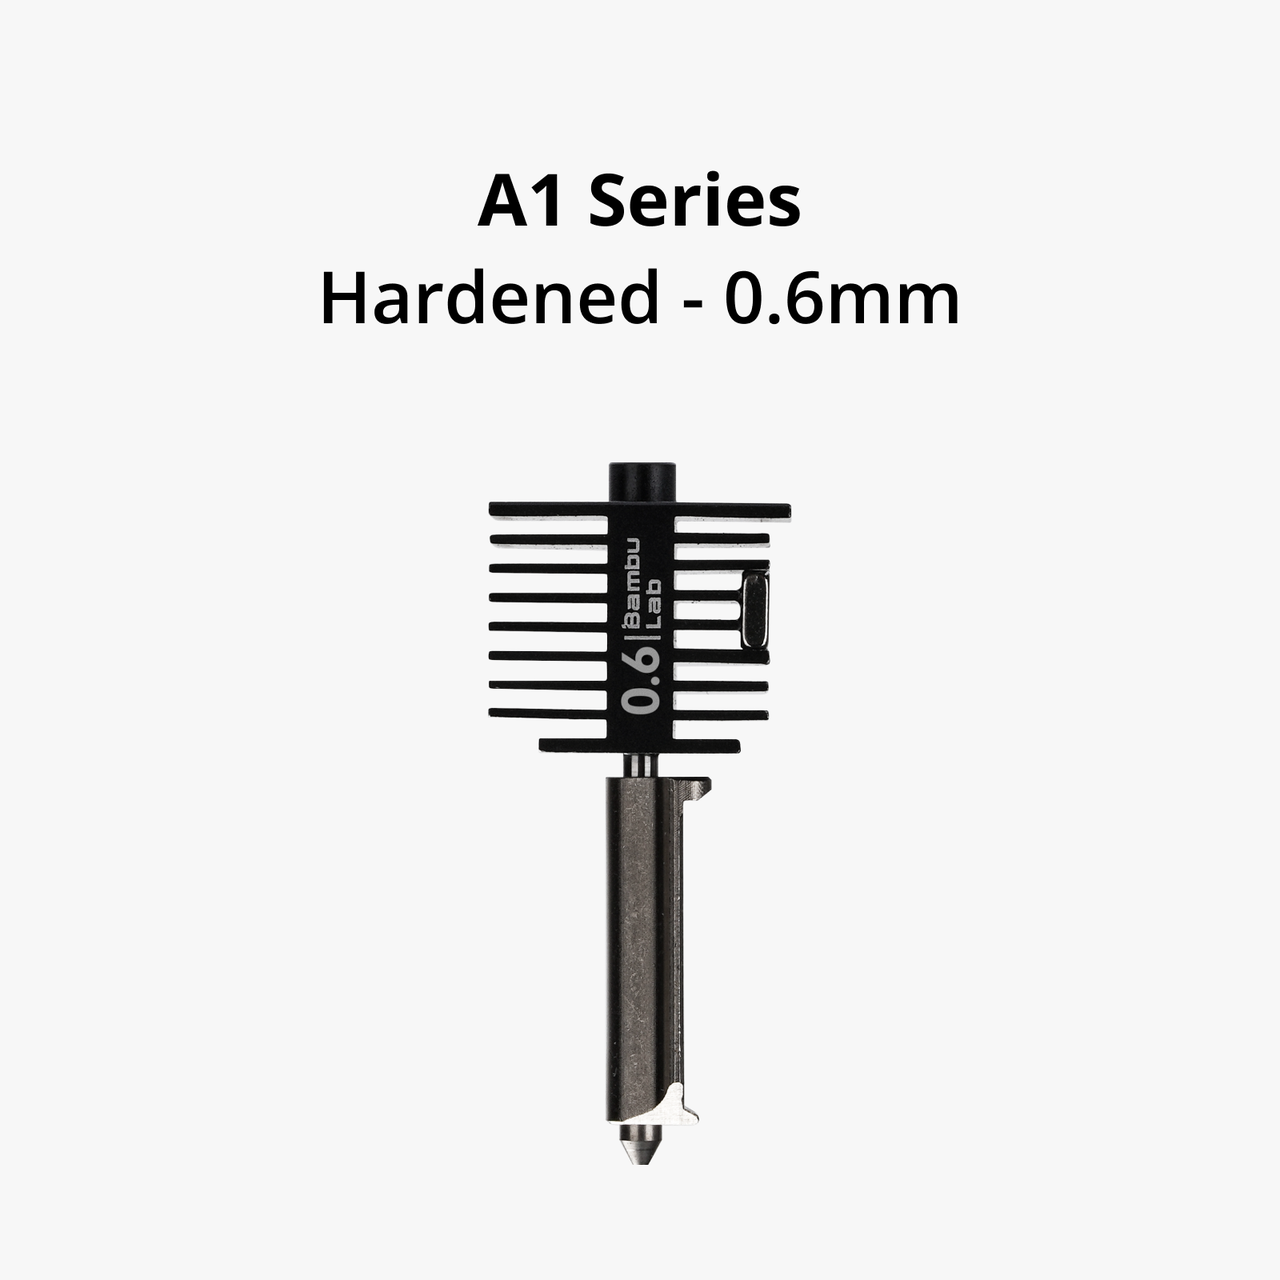 Hotend with hardened steel nozzle-0.6 mm - A1 - фото 1 - id-p115400742